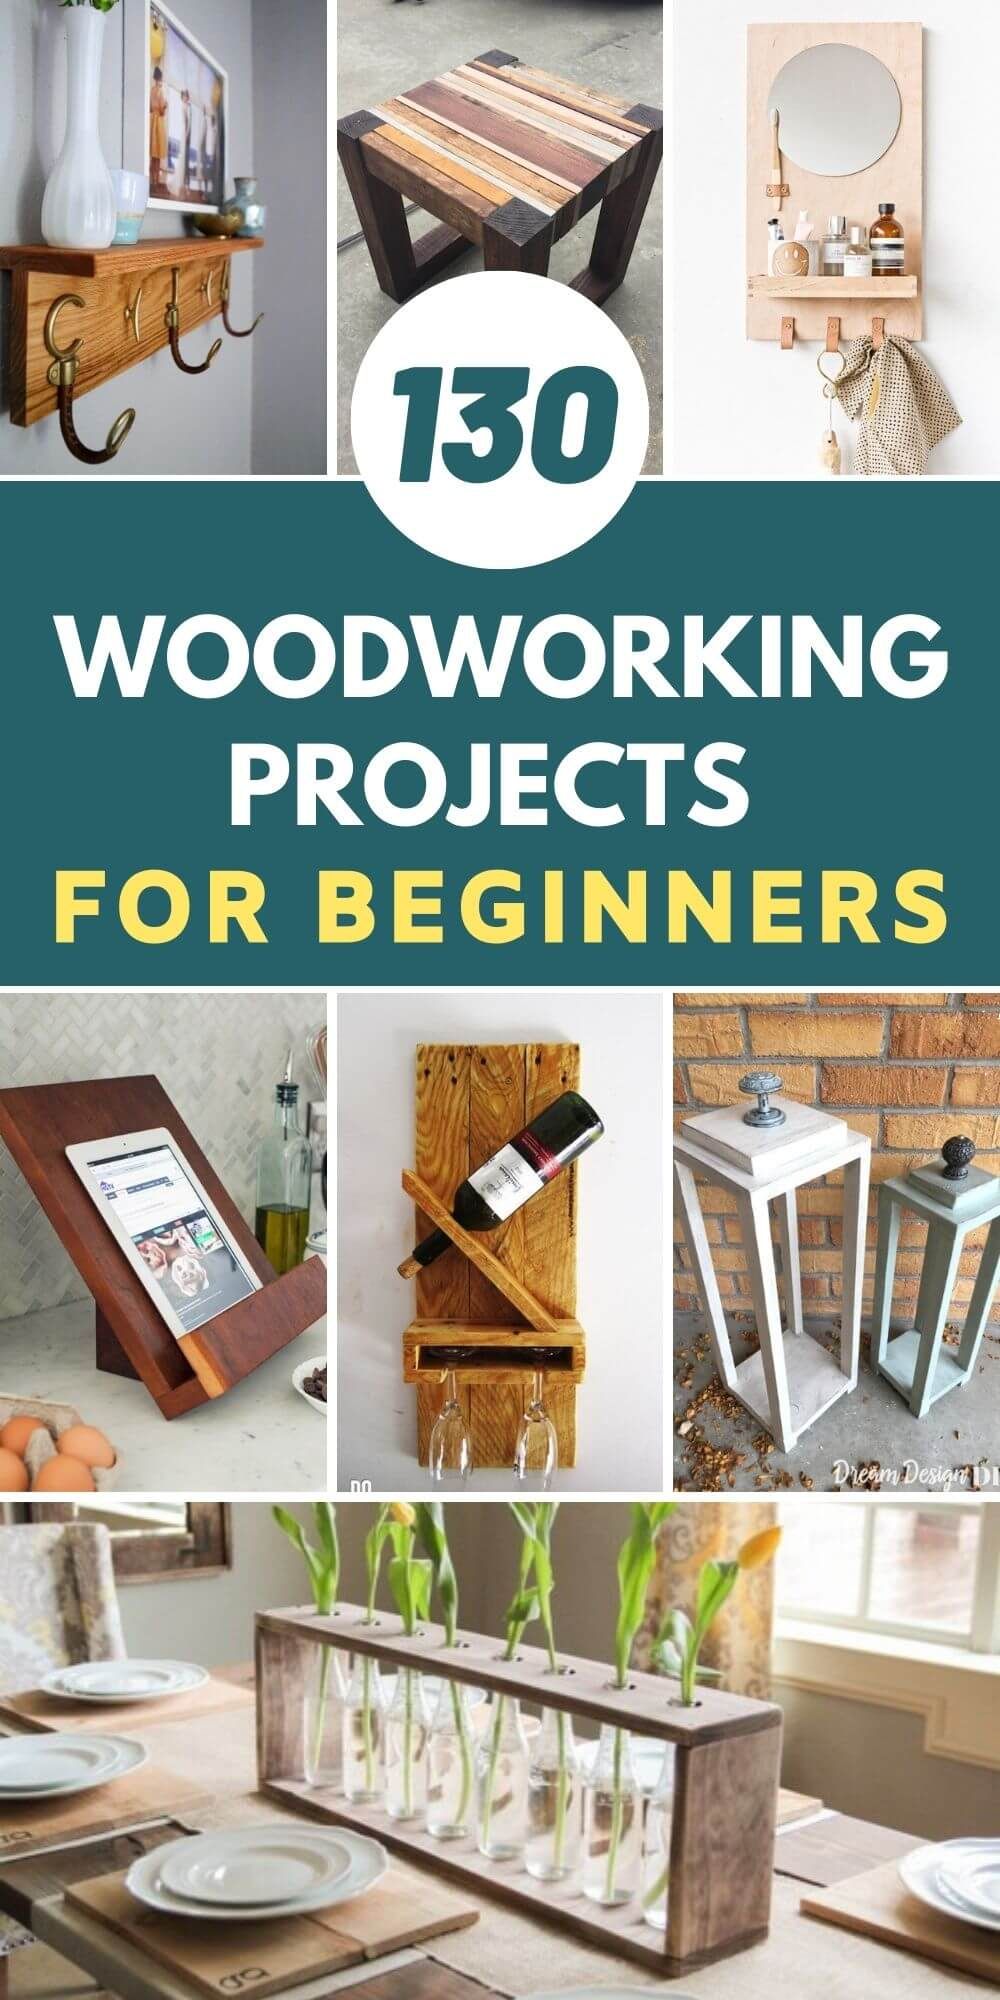 130 Best DIY Woodworking Projects For Beginners - Epic Saw Guy